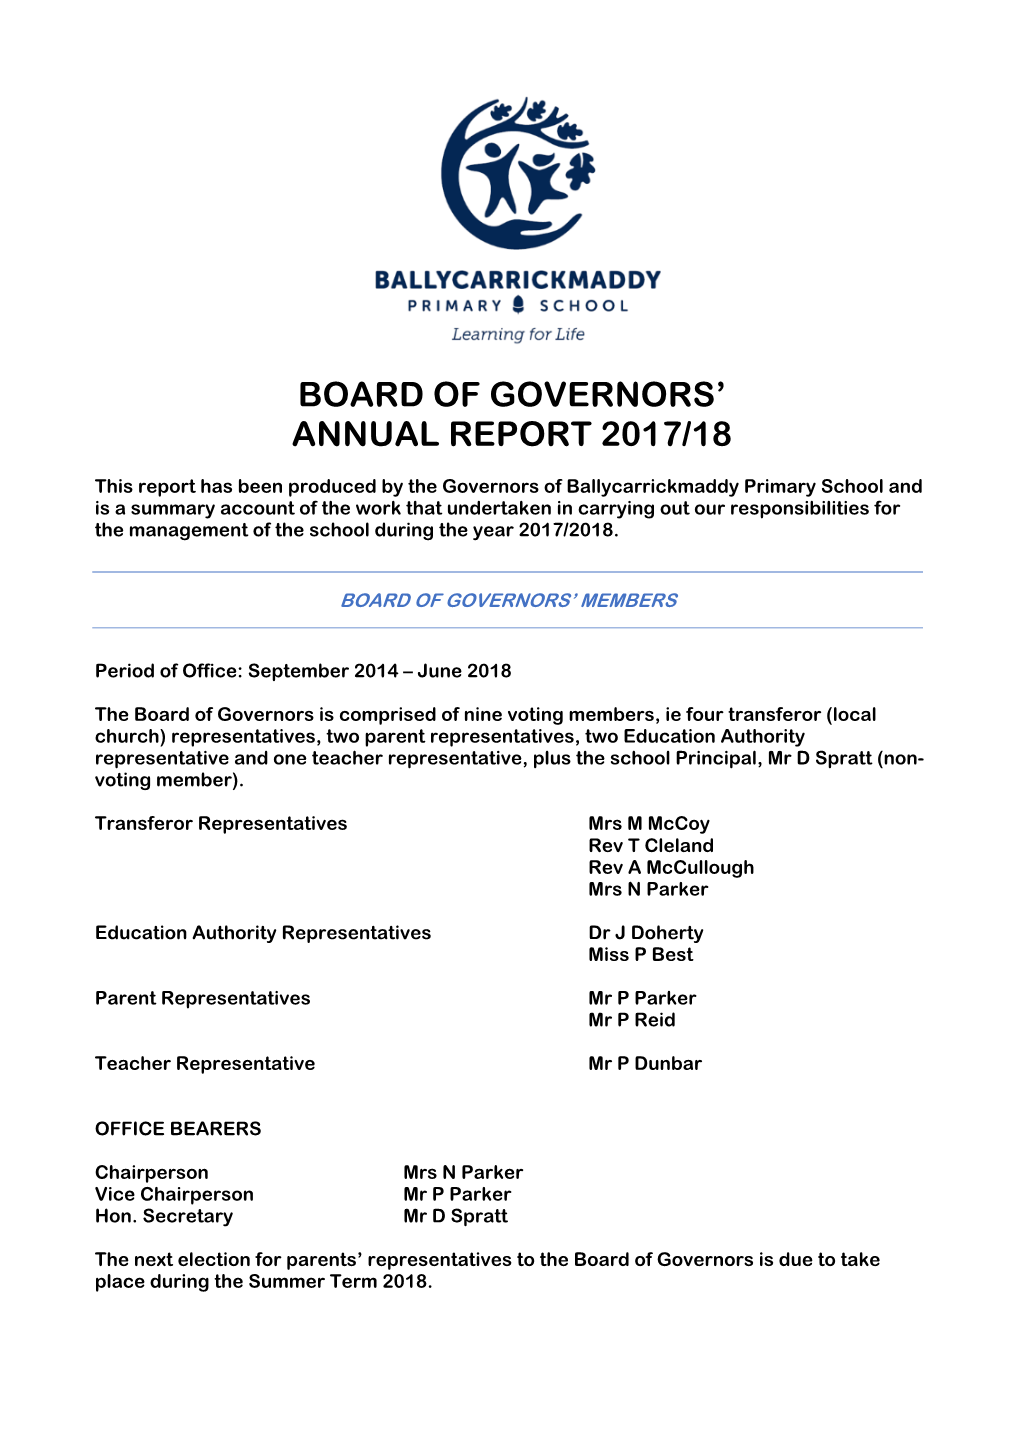 Board of Governors' Annual Report 2017/18